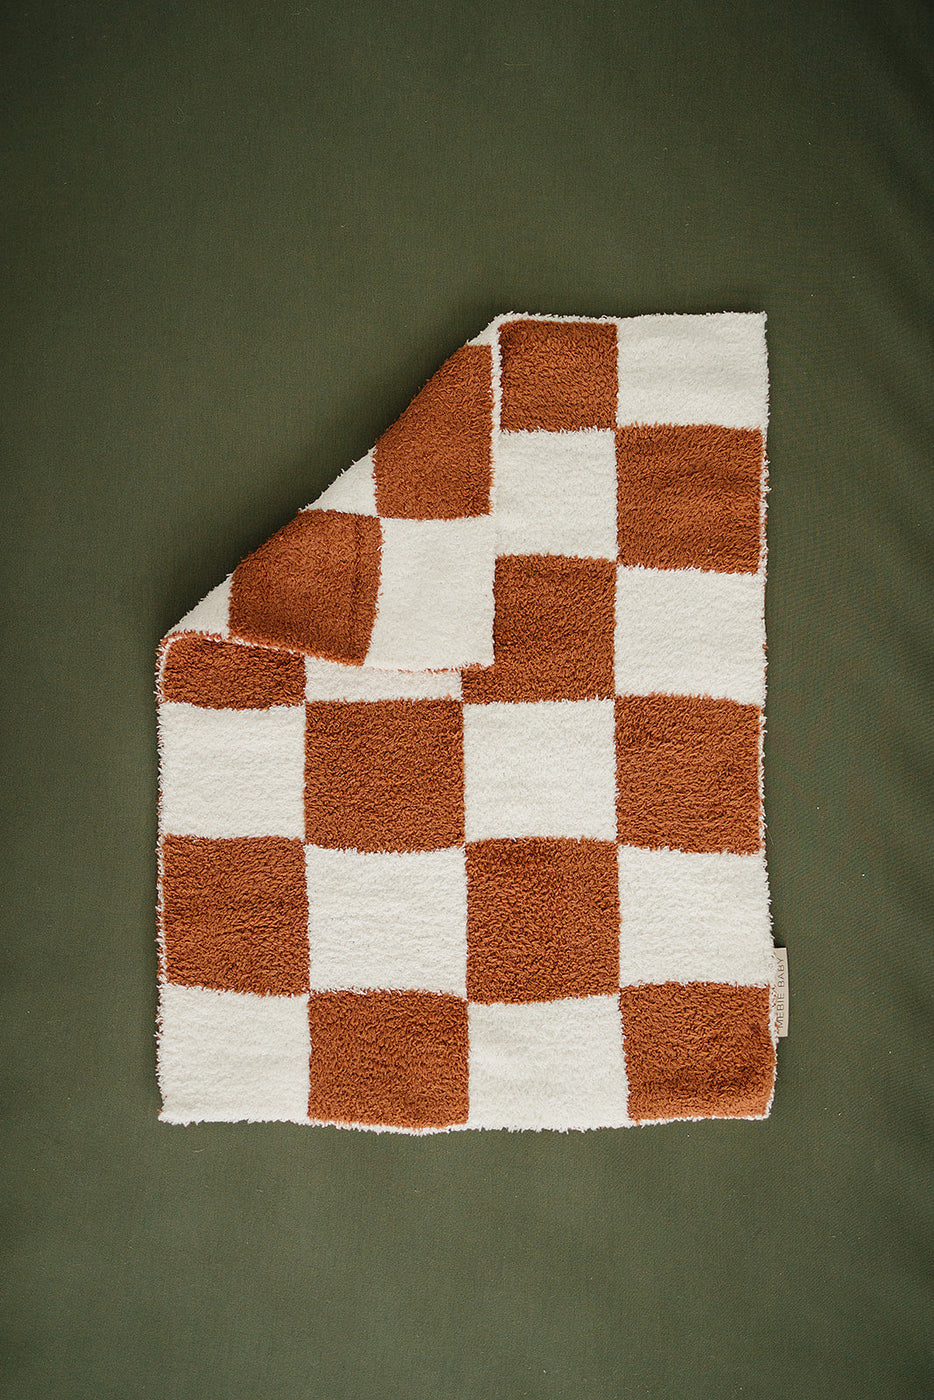 a blanket on a green surface